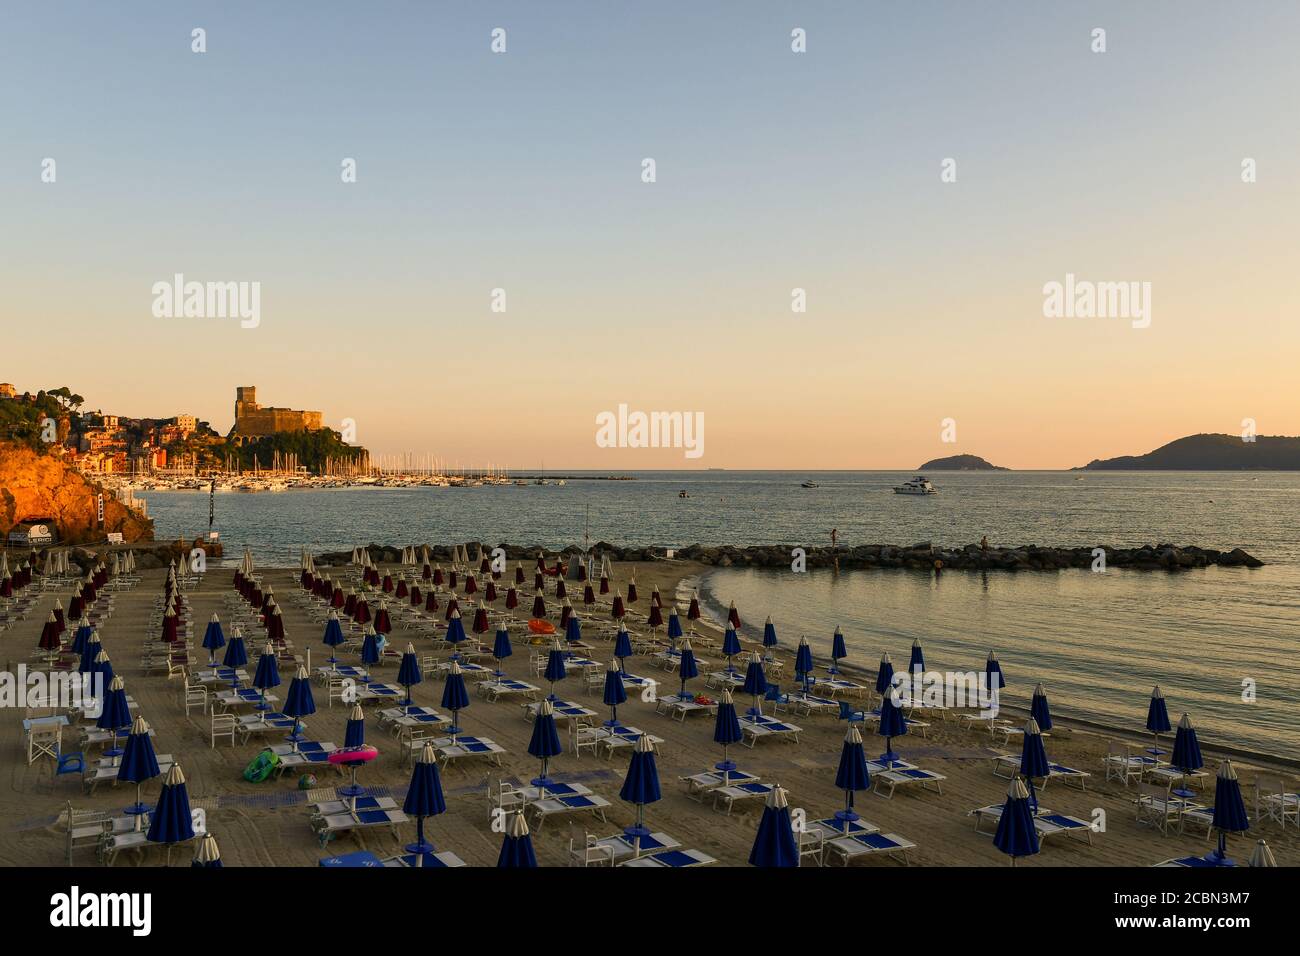 Elevated view of the Gulf of Poets with a beach, the fishing village and the Tino Island on the horizon at sunset, Lerici, La Spezia, Liguria, Italy Stock Photo